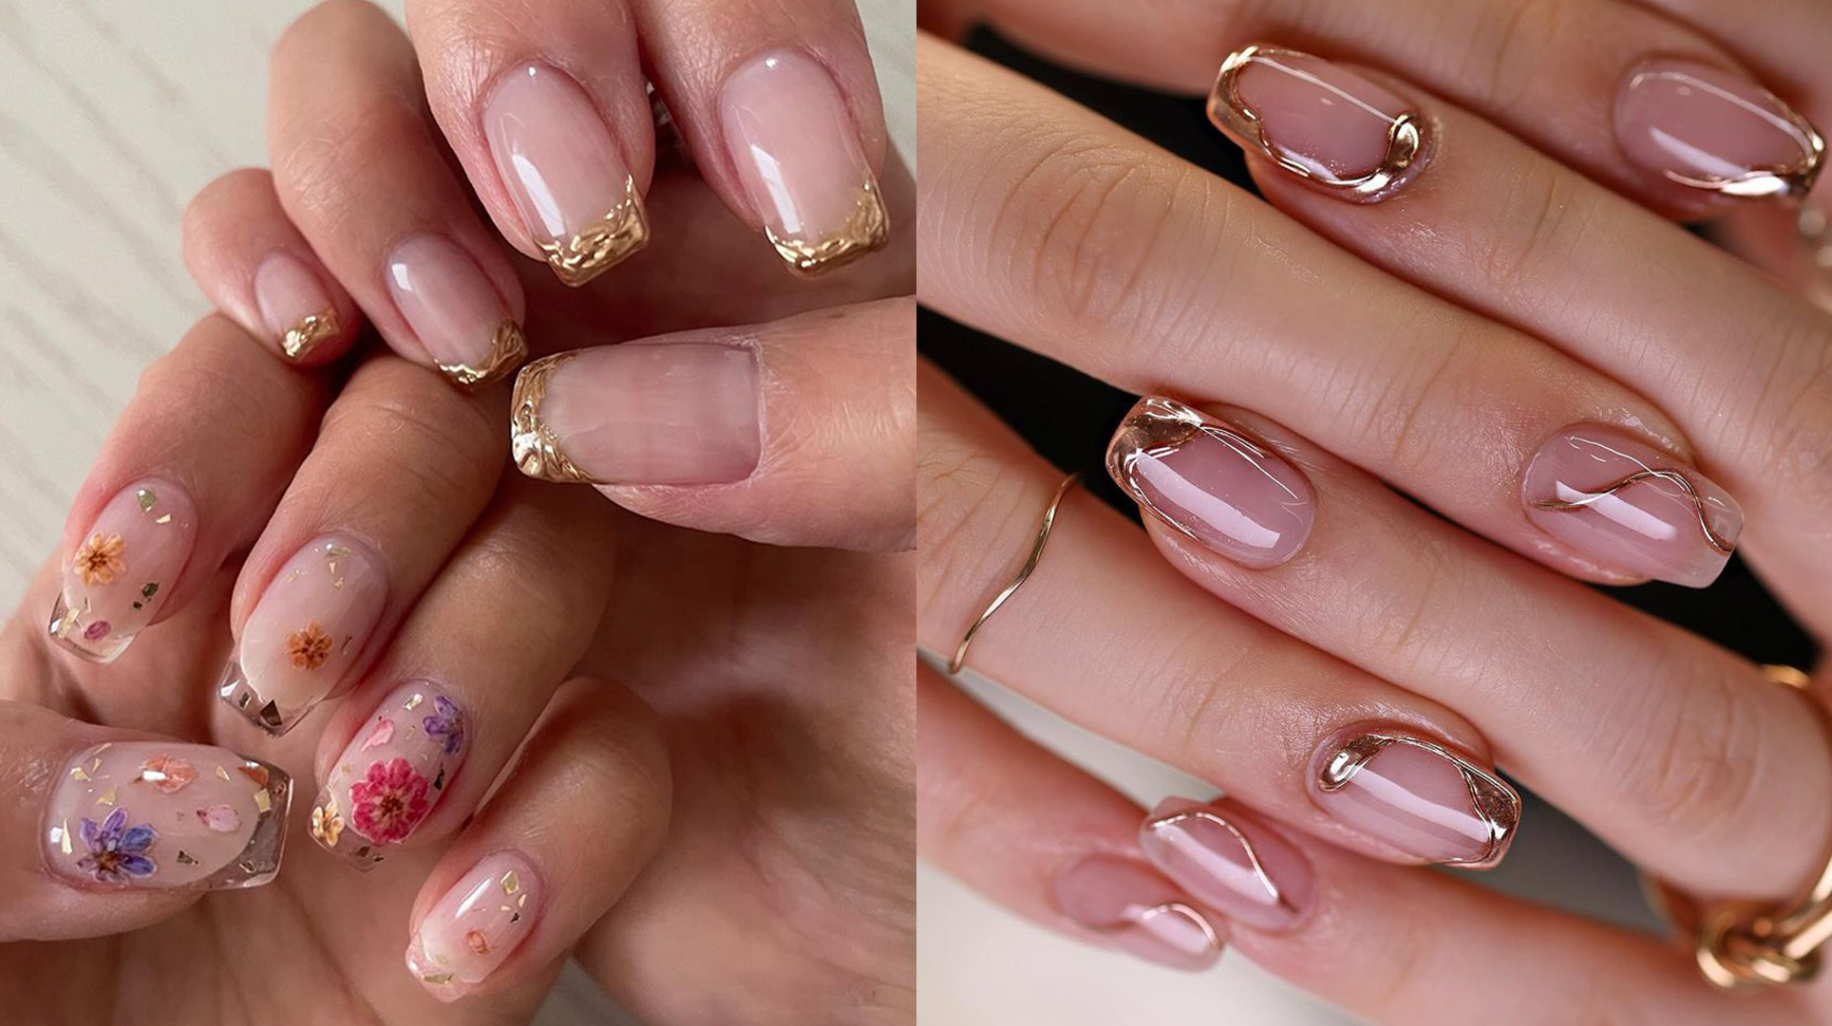 Nude Nail Art Ideas: Stunning Designs For A Chic And Sophisticated Look